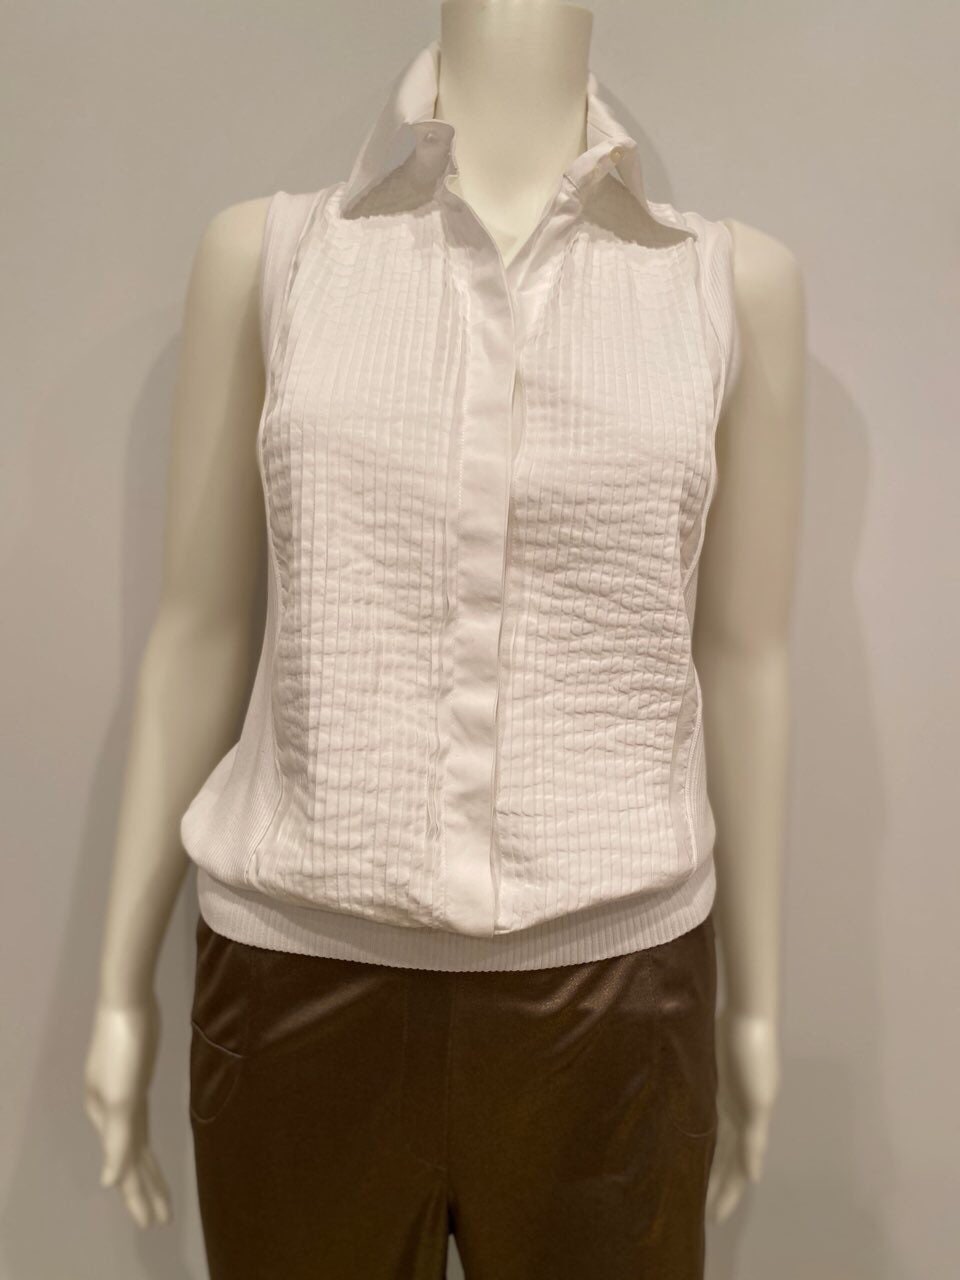 HelensChanel Vintage Chanel 02p, 2002 Spring Pink Brown Pinstripe Cotton Sleeveless Blouse Tunic Top FR 36 US 6